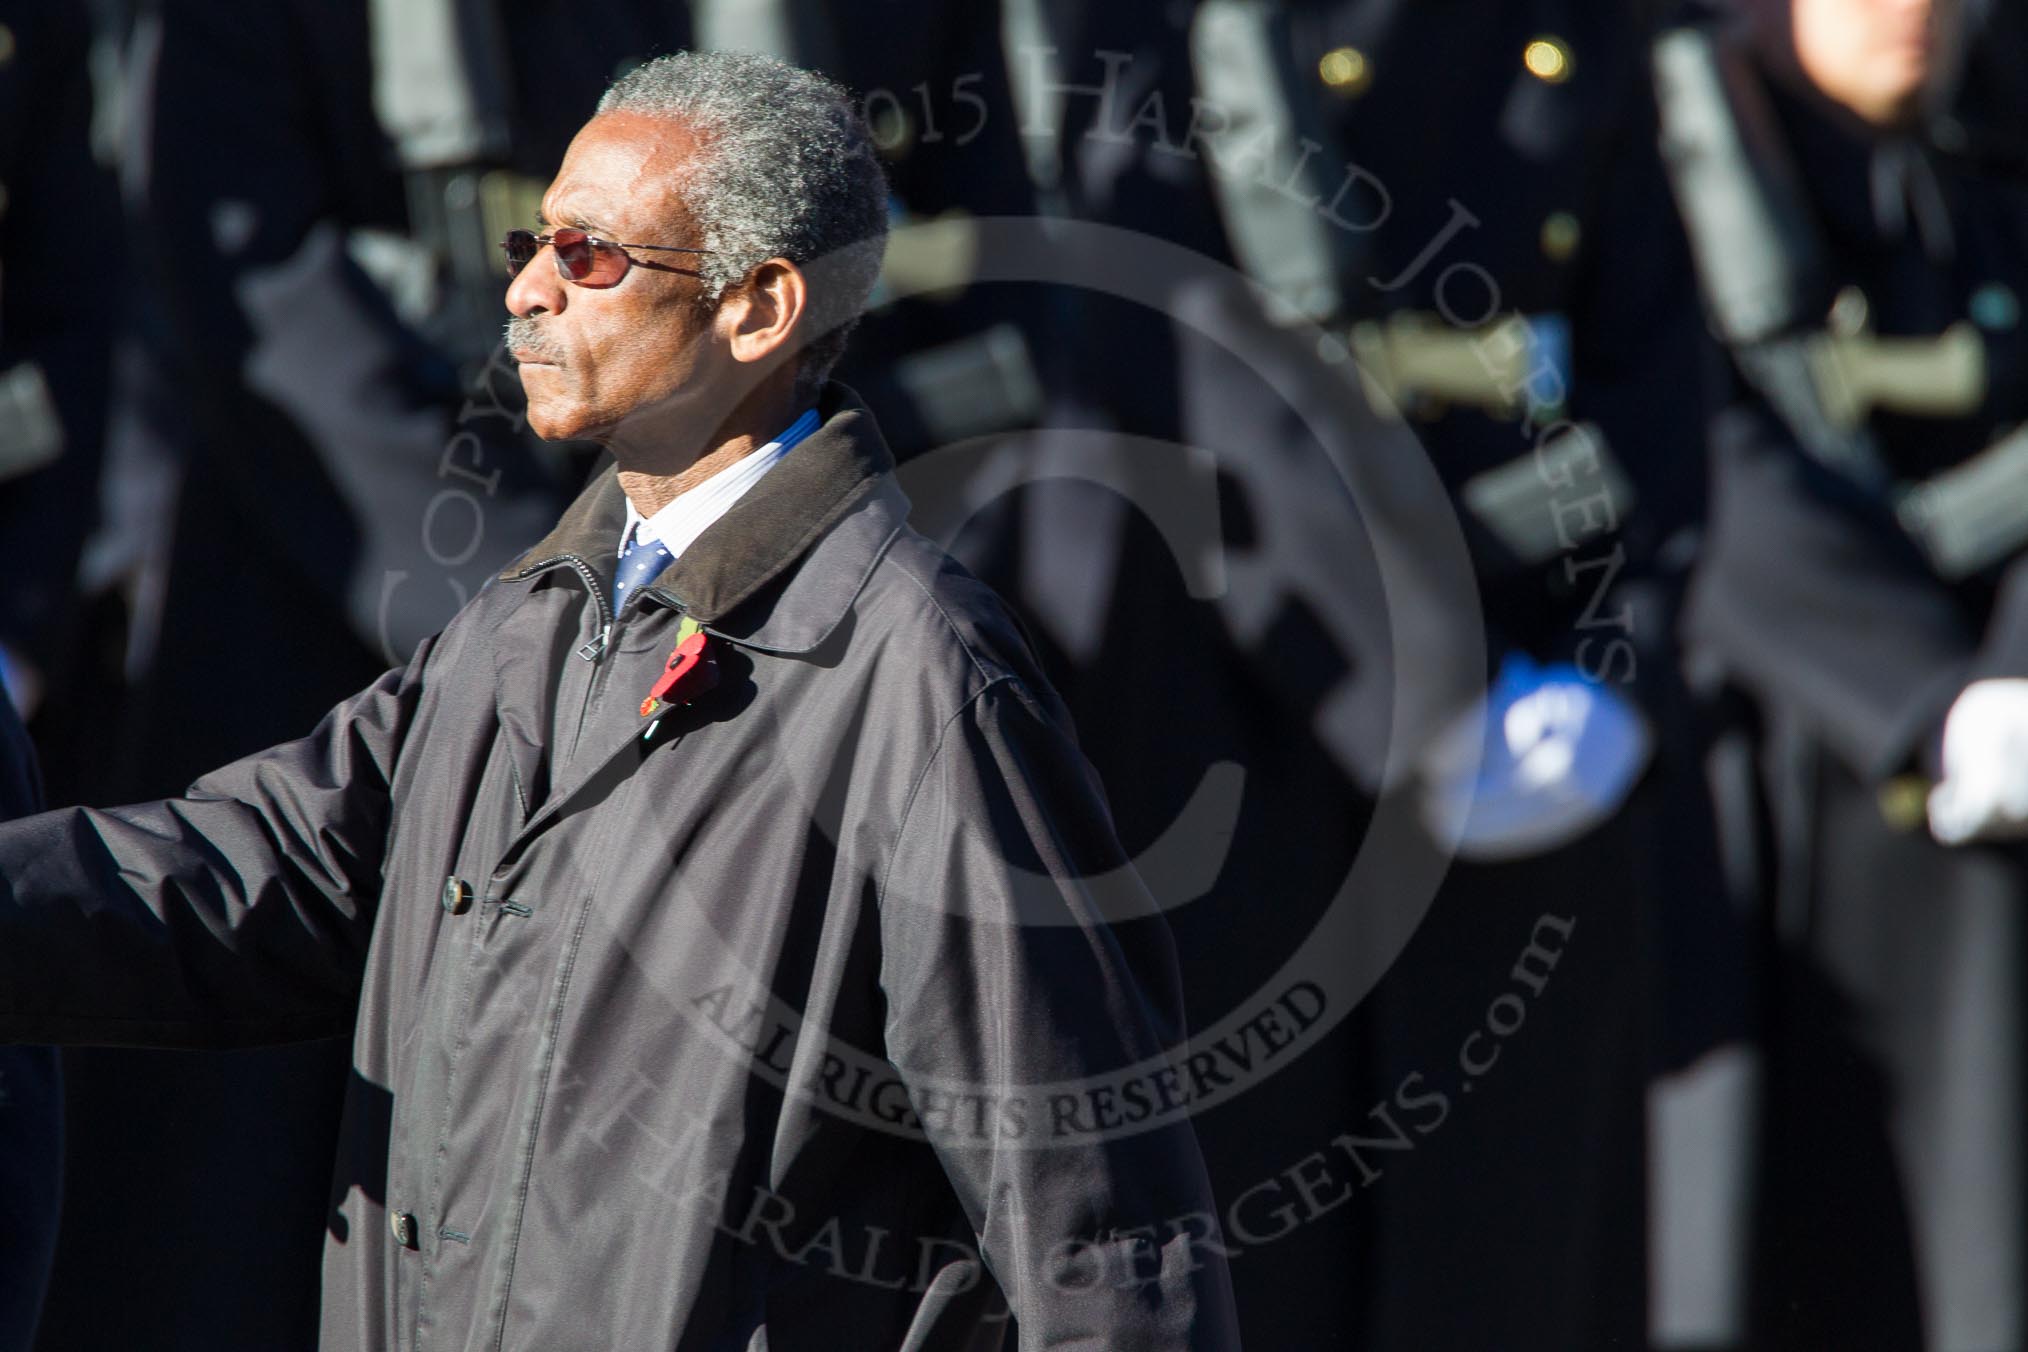 Remembrance Sunday Cenotaph March Past 2013: D3 - West Indian Association of Service Personnel..
Press stand opposite the Foreign Office building, Whitehall, London SW1,
London,
Greater London,
United Kingdom,
on 10 November 2013 at 11:39, image #50